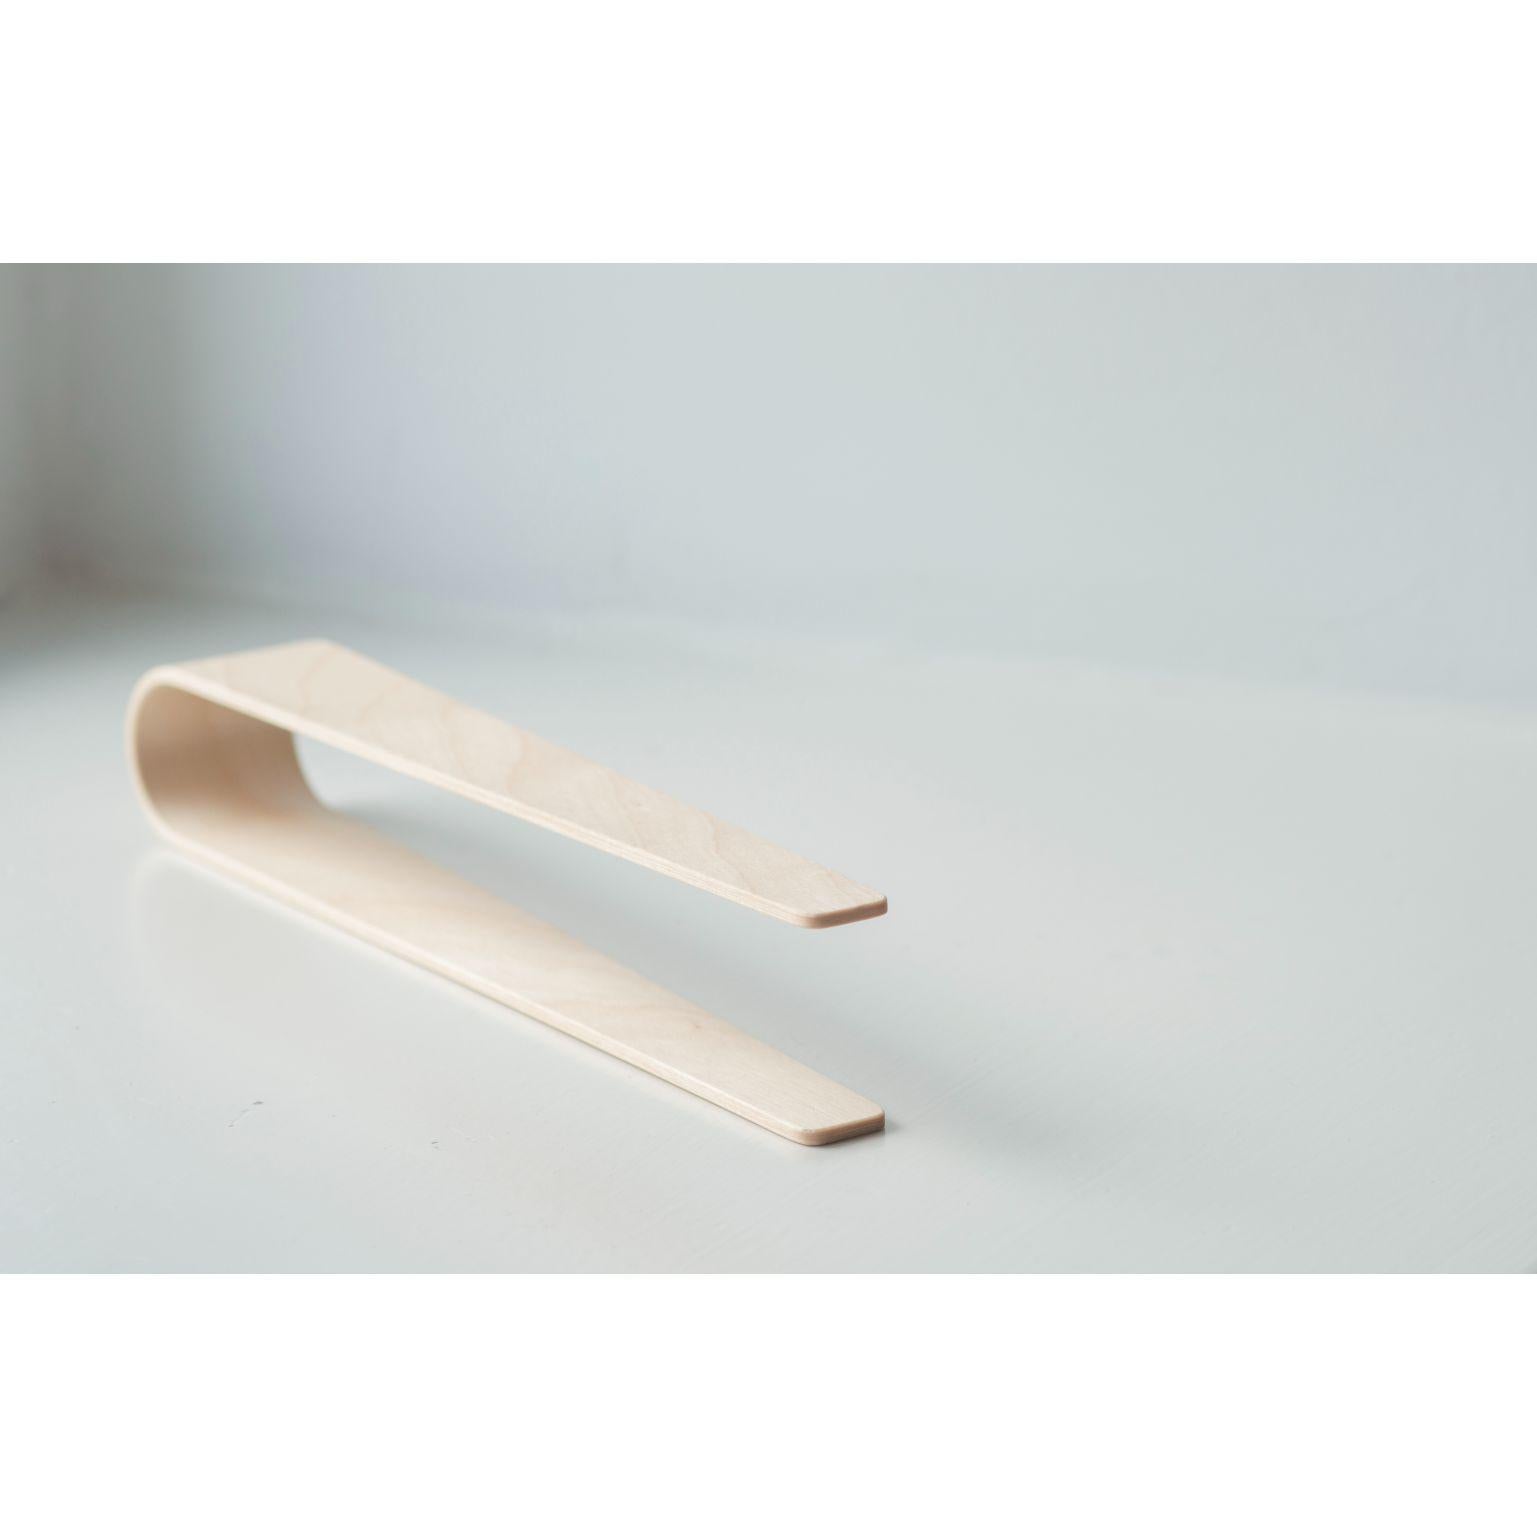 Birch Nokka tongs by Antrei Hartikainen
Materials: Walnut, maple, natural oil wax
Dimensions: W 24,5 D 4/2 H 6 cm

Also available in a variety of woods

Nokka tongs are suitable for serving a range of light foods including appetizers, salads,